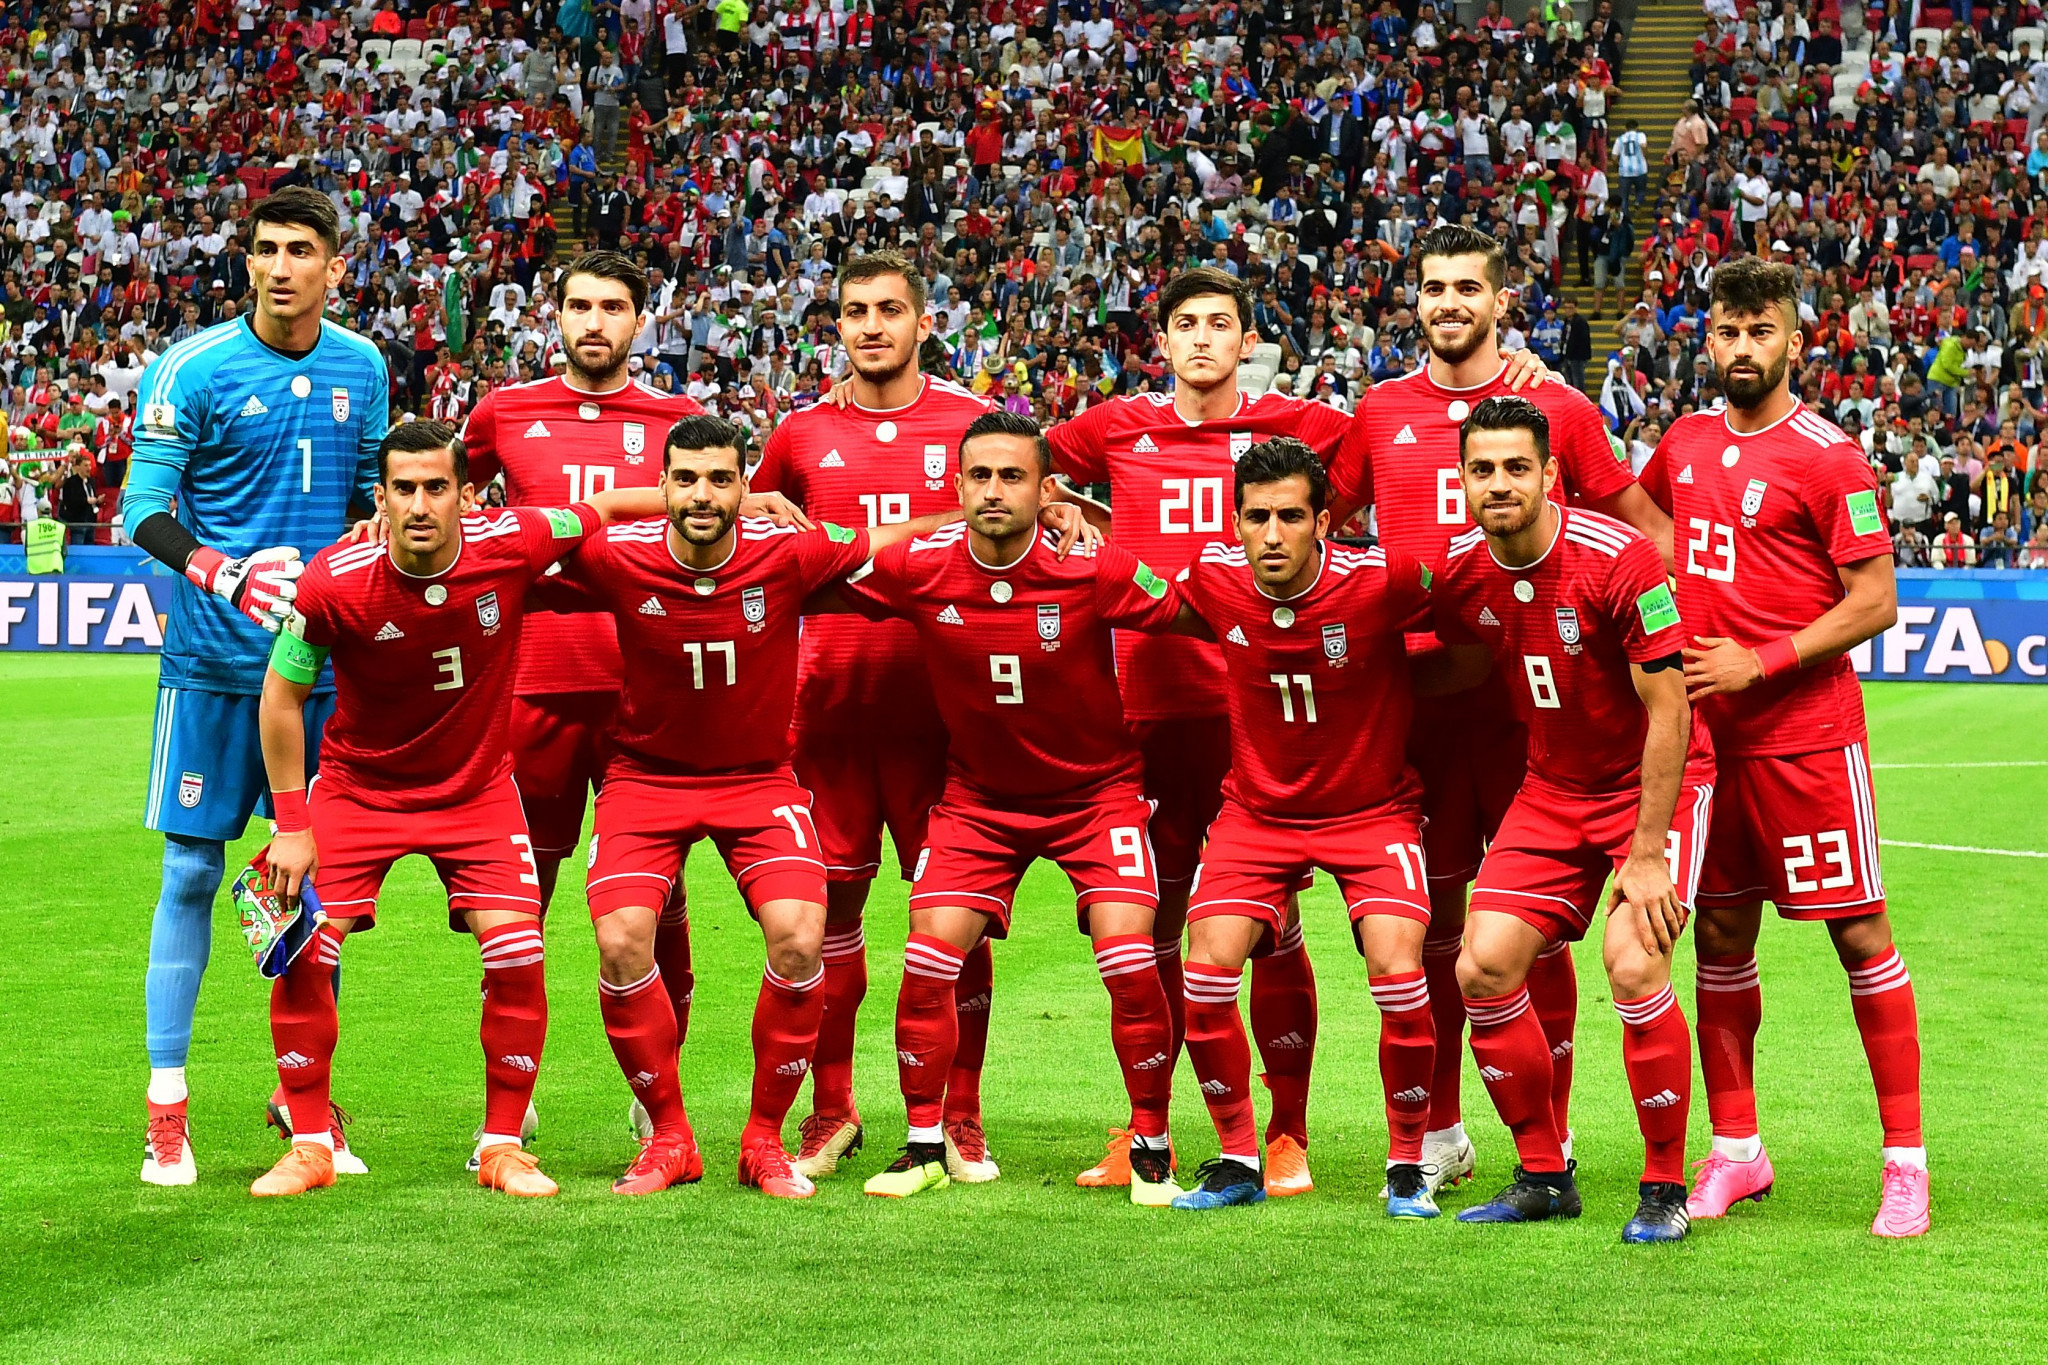 Iran picked up four points at the 2018 FIFA World Cup, but could not advance beyond the group stage ©Getty Images